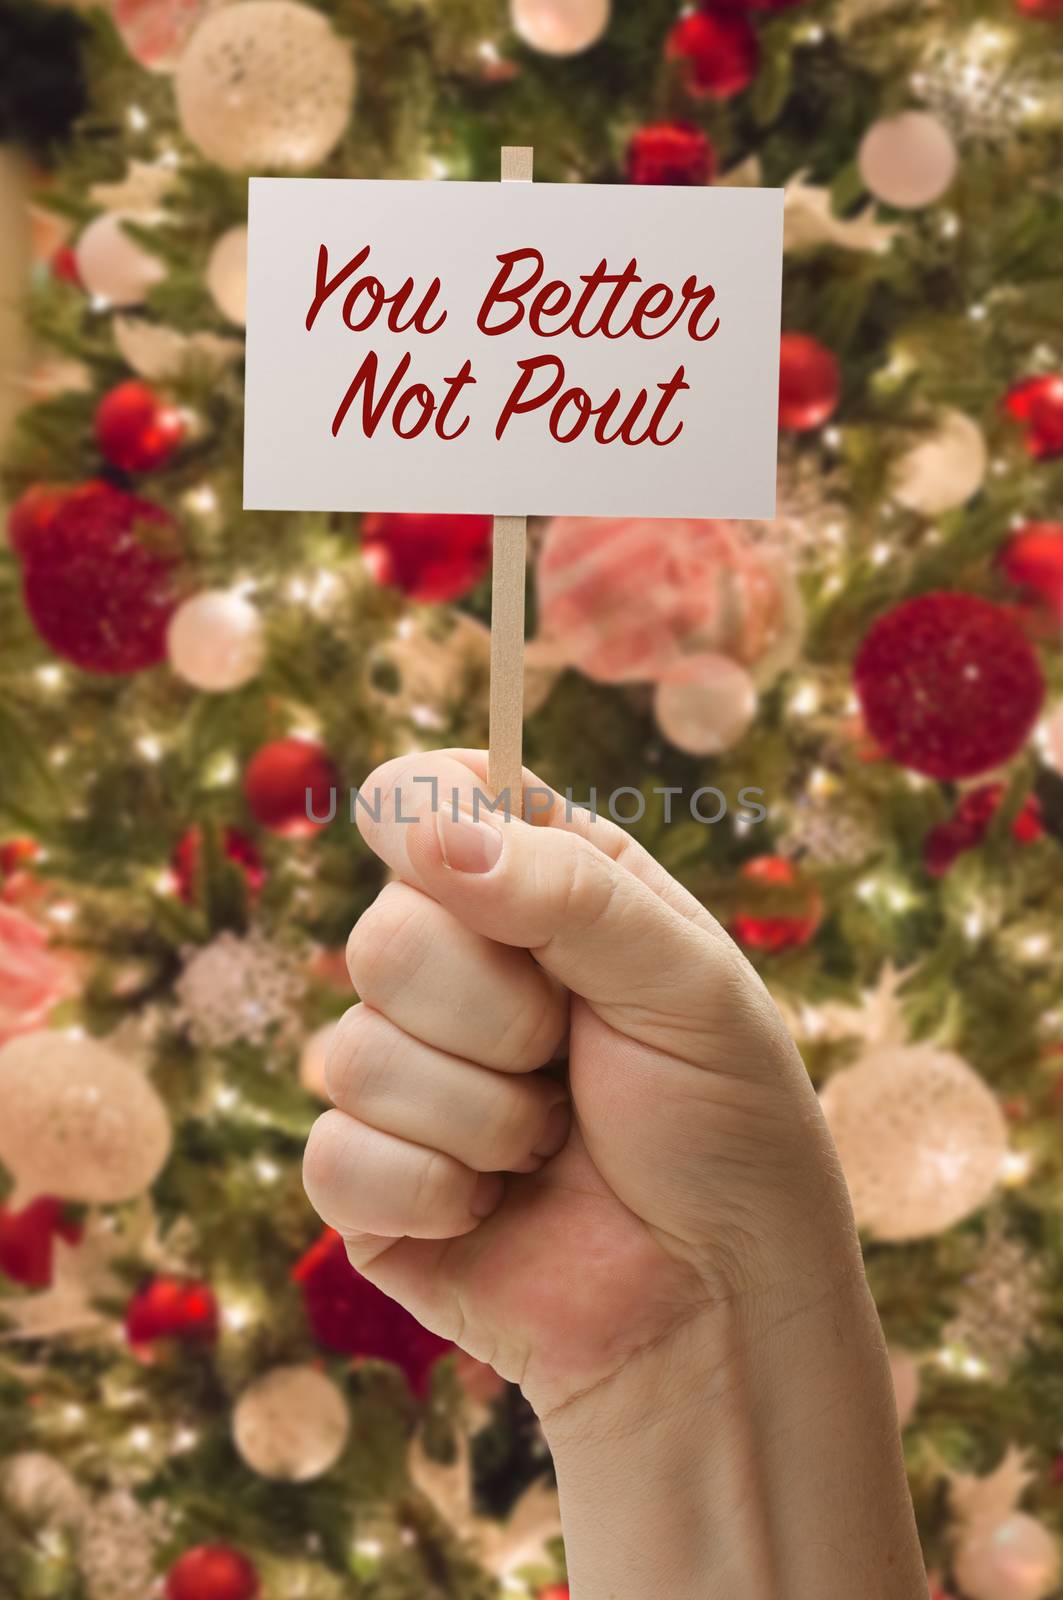 Hand Holding You Better Not Pout Card In Front of Decorated Christmas Tree.